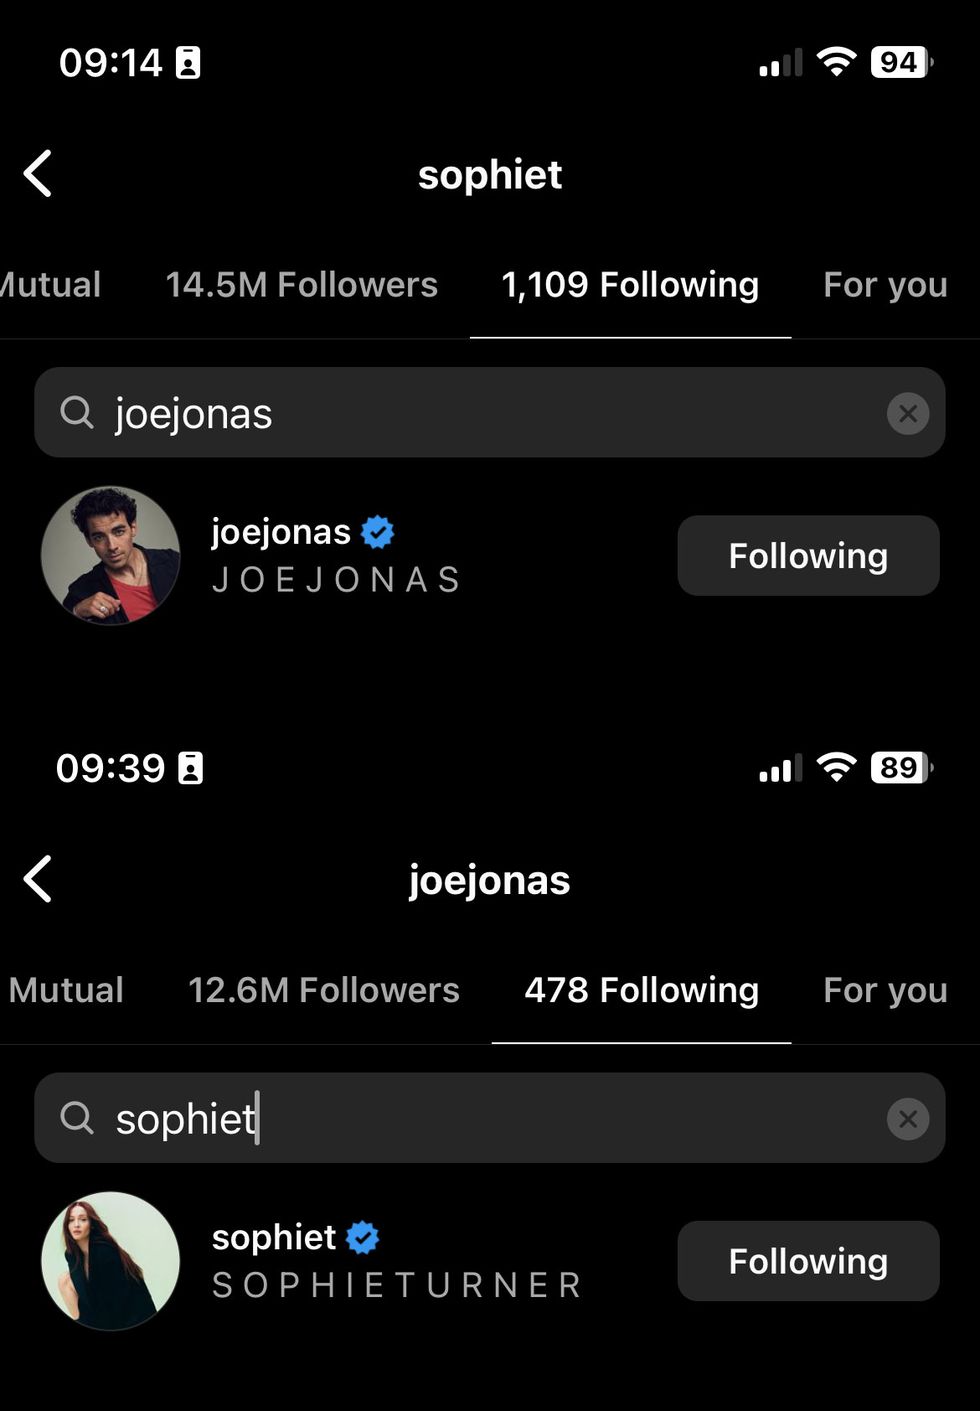 joe jonas and sophie turner still following each other as of october 13 at 930 am﻿